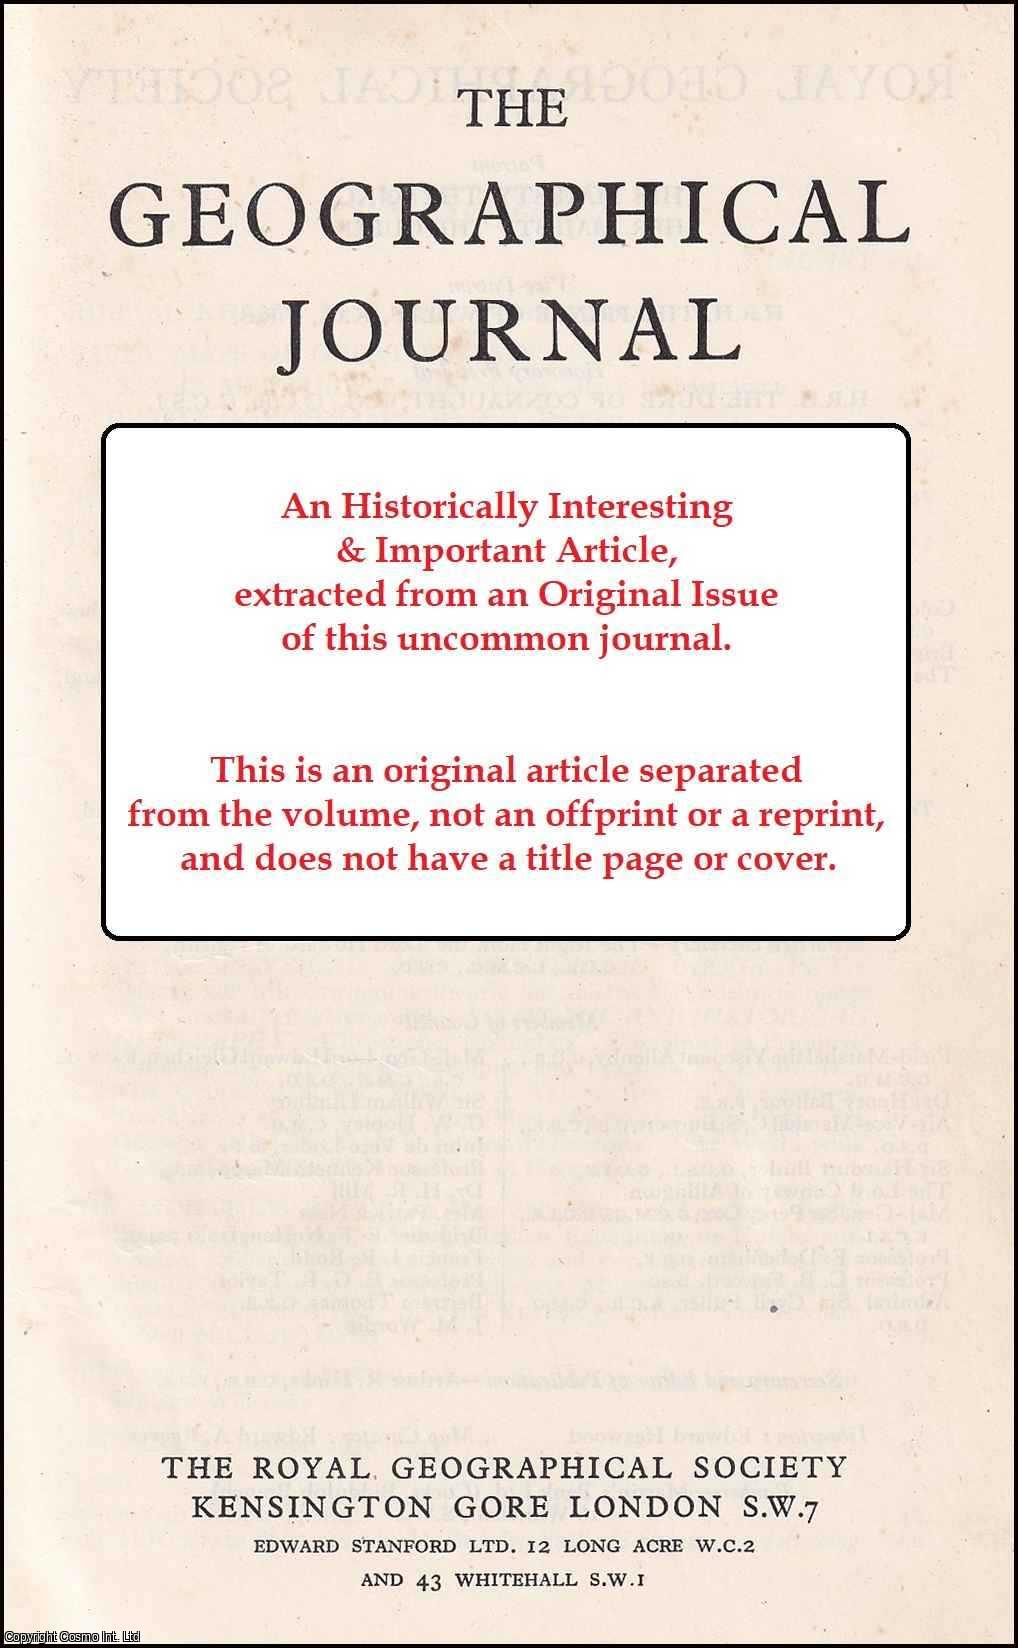 D. J. Spooner - The Southern Problem, The Neapolitan Problem and Italian Regional Policy. An original article from The Geographical Journal, 1984.